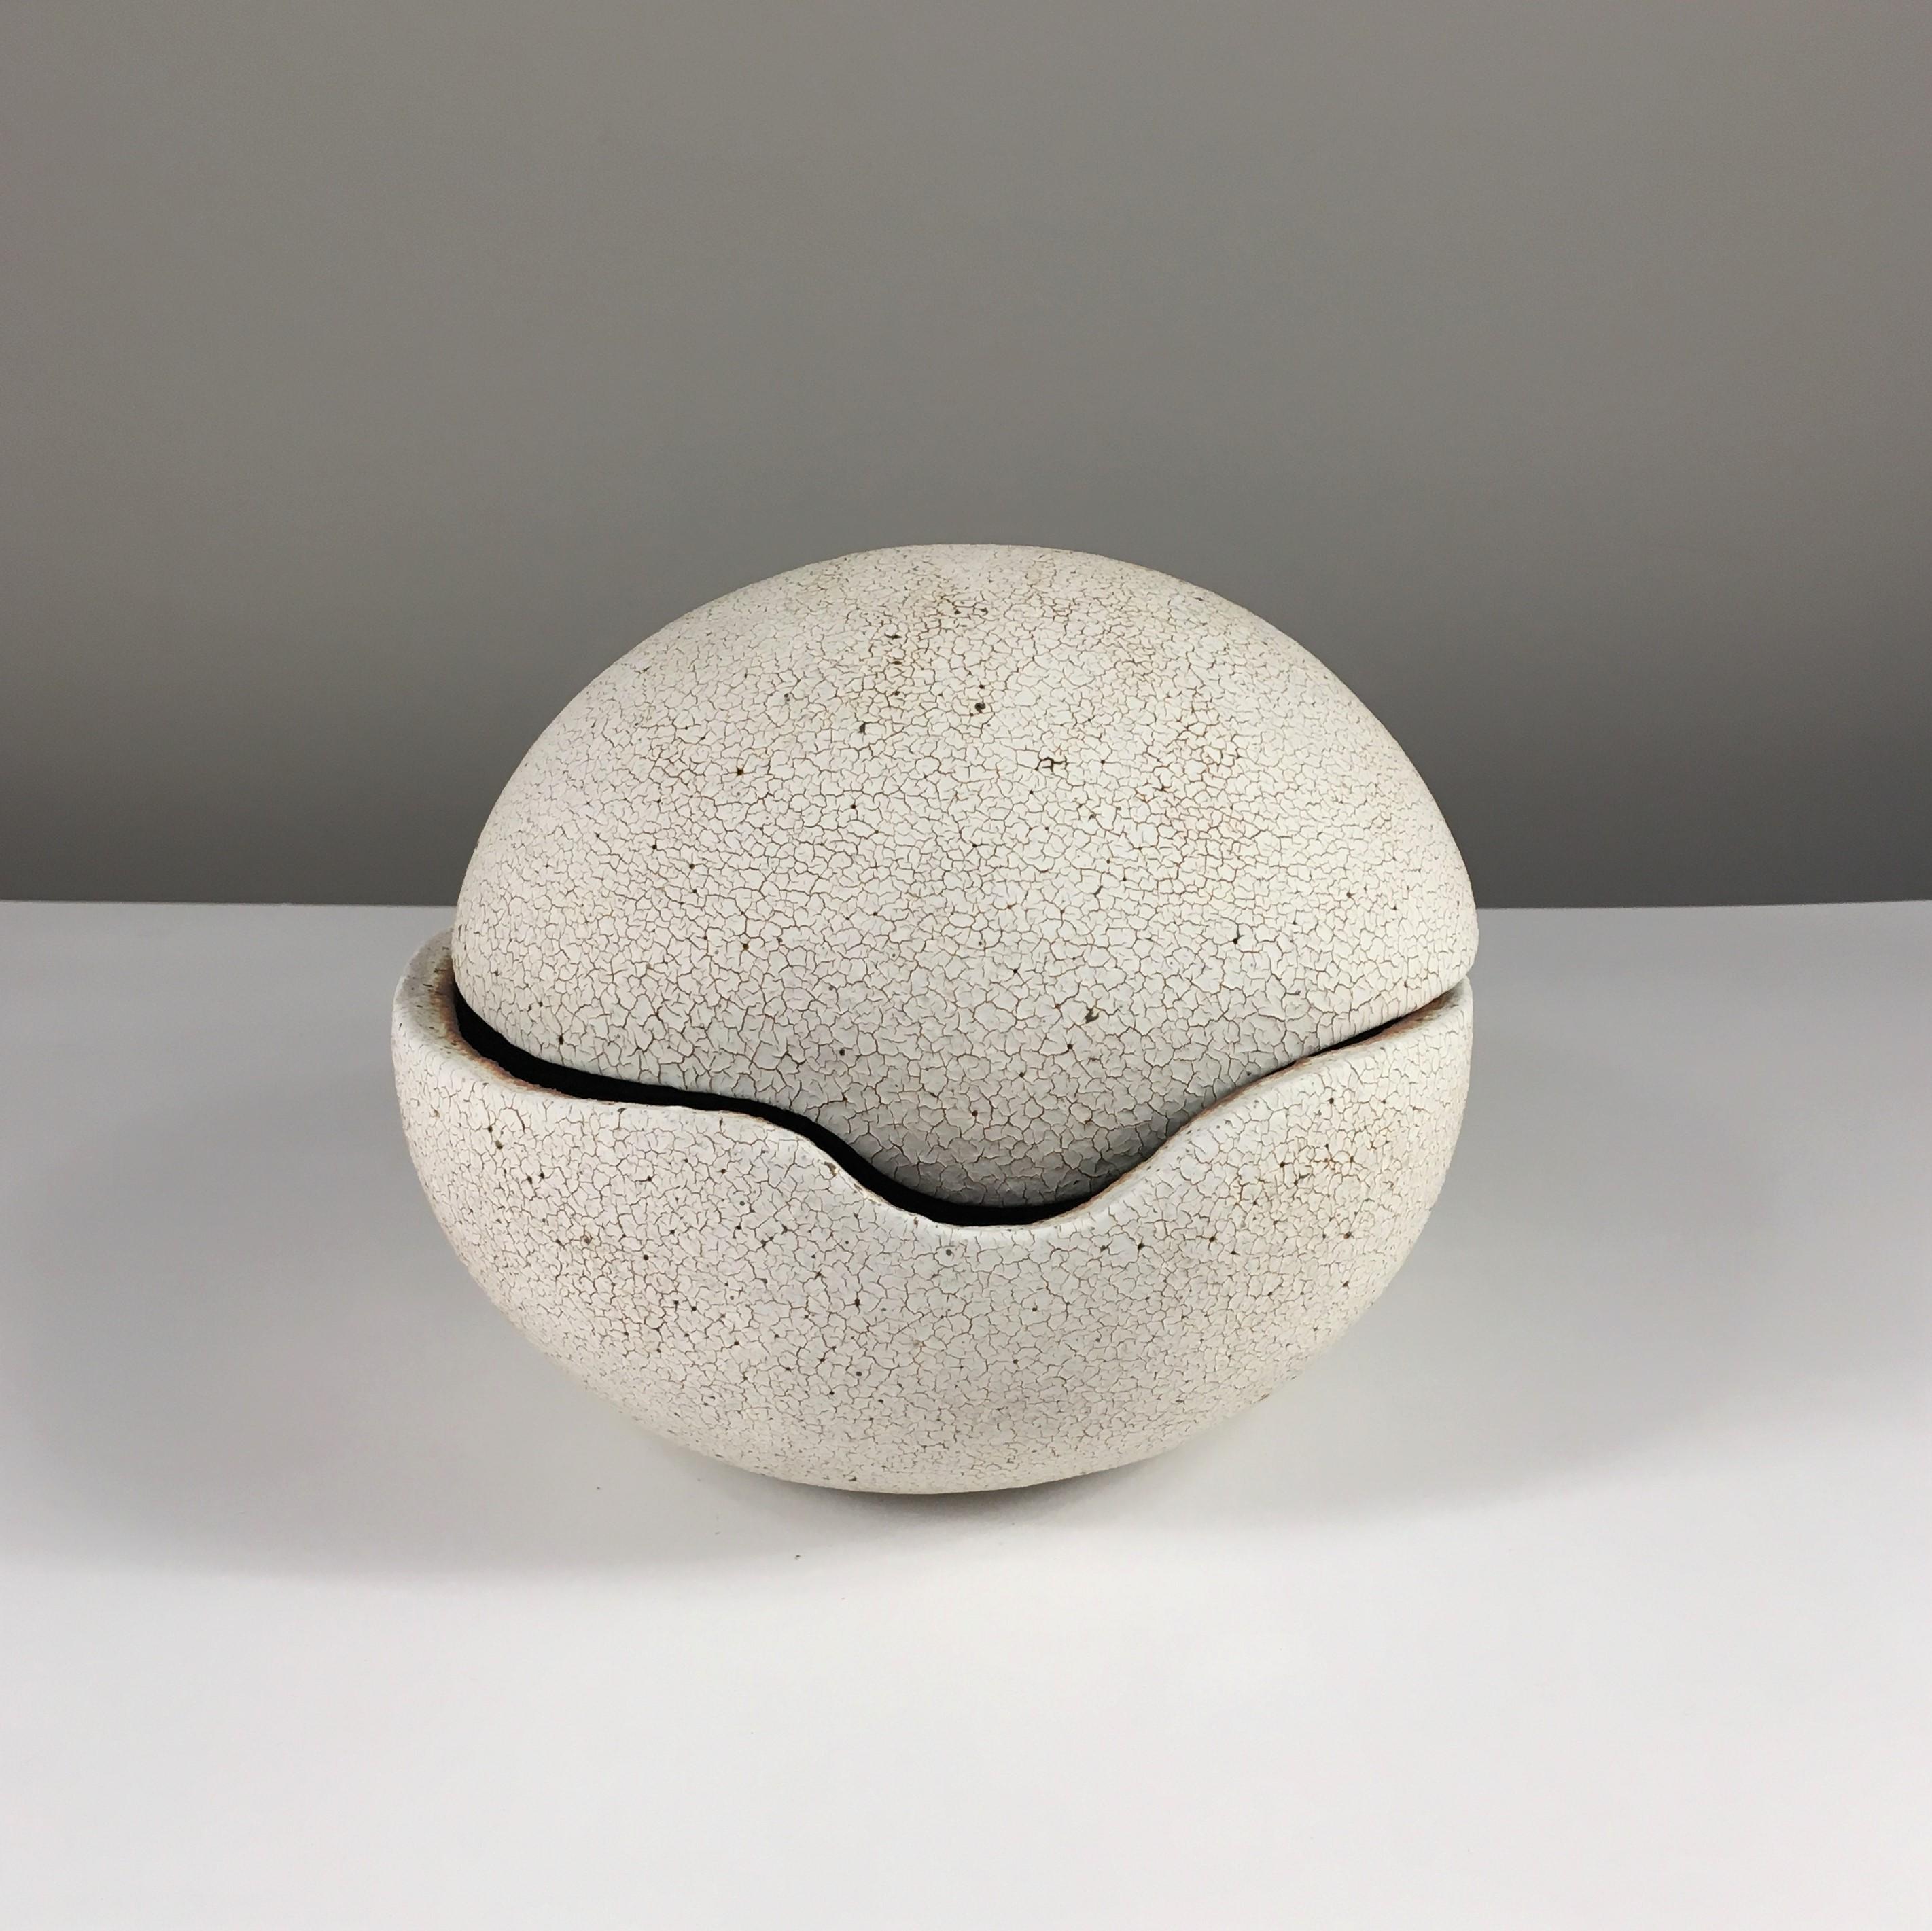 Ceramic Covered Orb by Yumiko Kuga. Dimensions:  Width 6.5